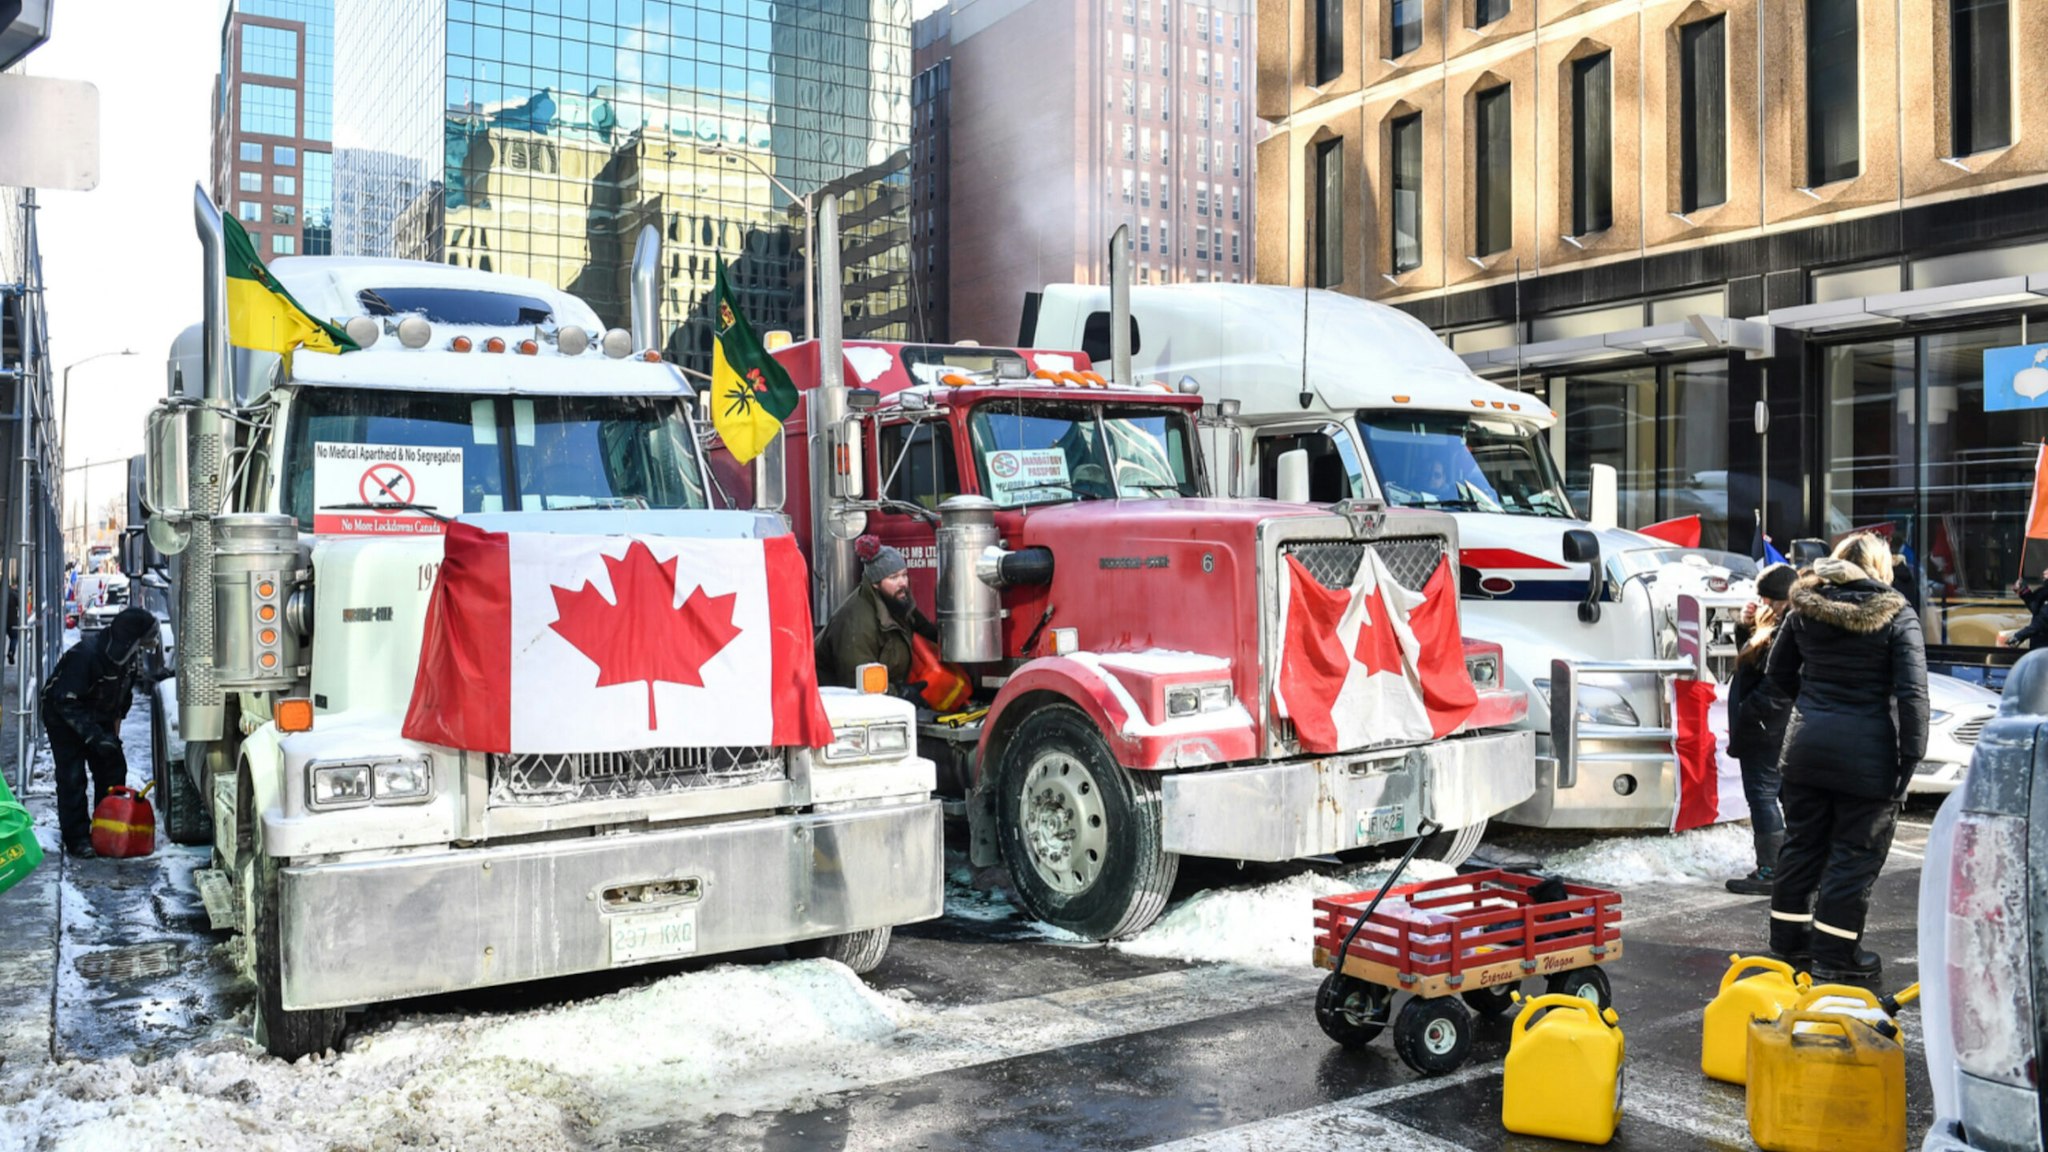 Truckers refuel their trucks in the cold during the Freedom Convoy truck protest on February 5, 2022 in Ottawa, Canada.